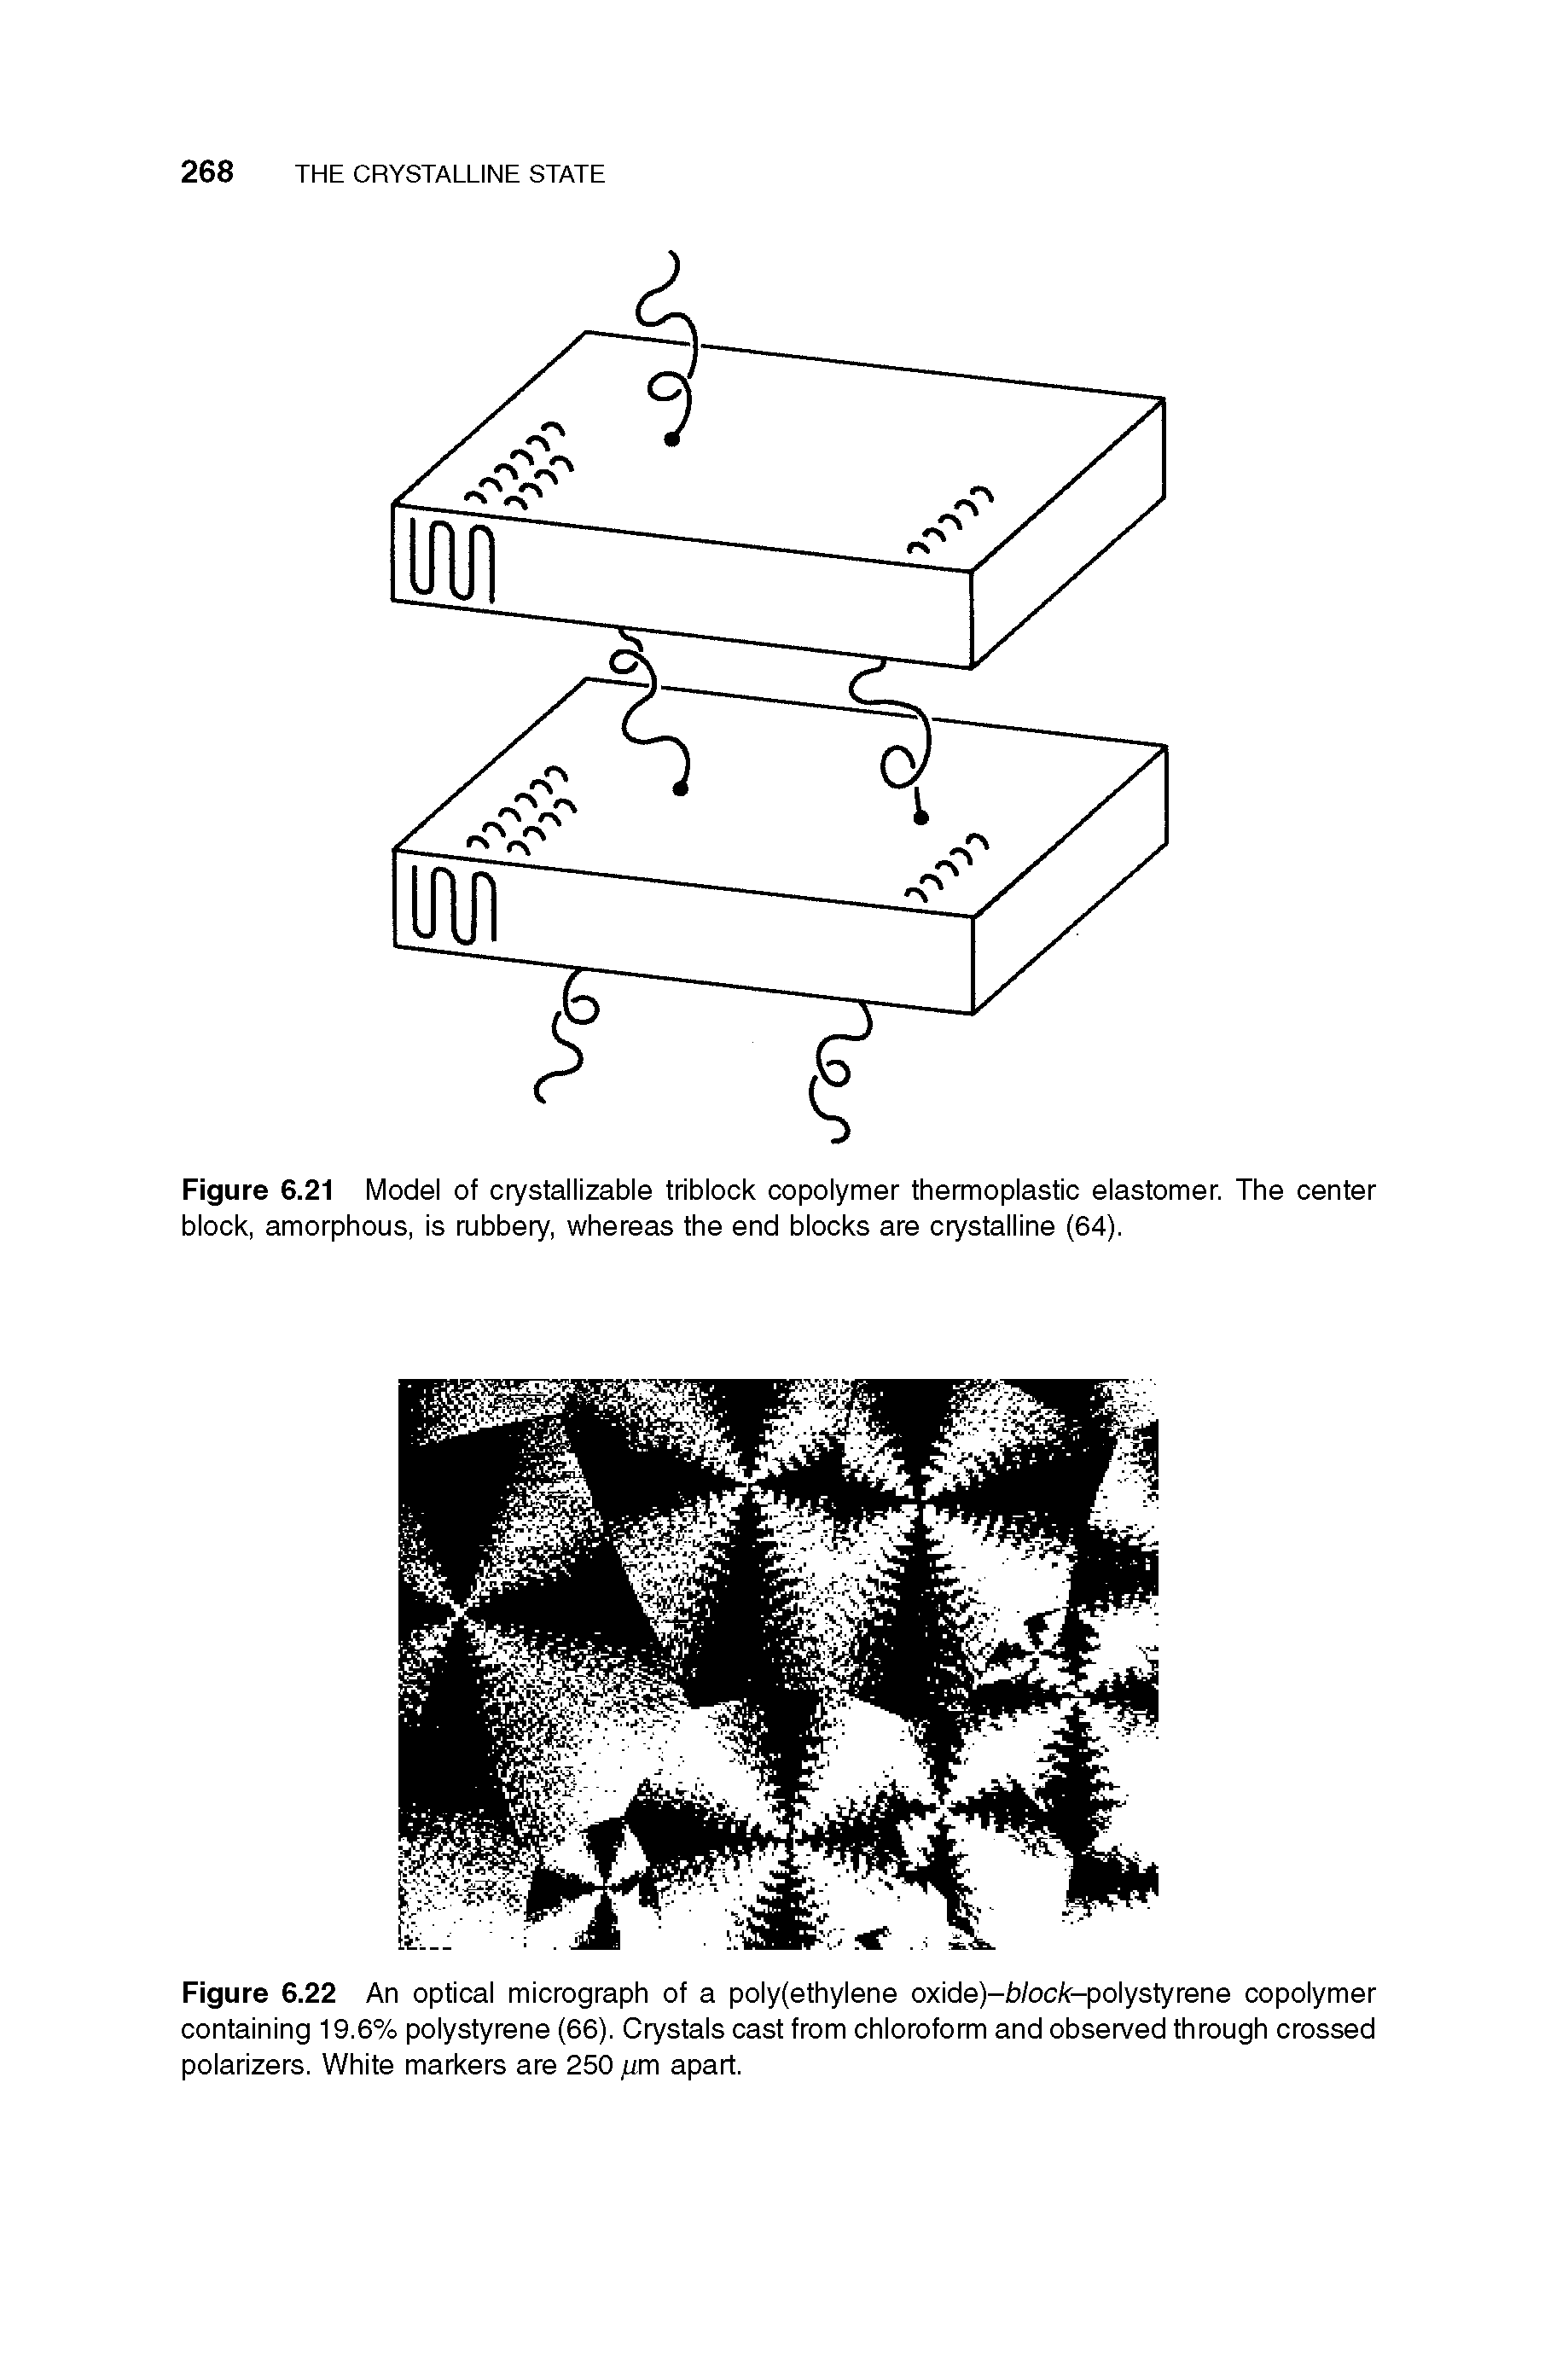 Figure 6.21 Model of crystallizable triblock copolymer thermoplastic elastomer. The center block, amorphous, is rubbery, whereas the end blocks are crystalline (64).